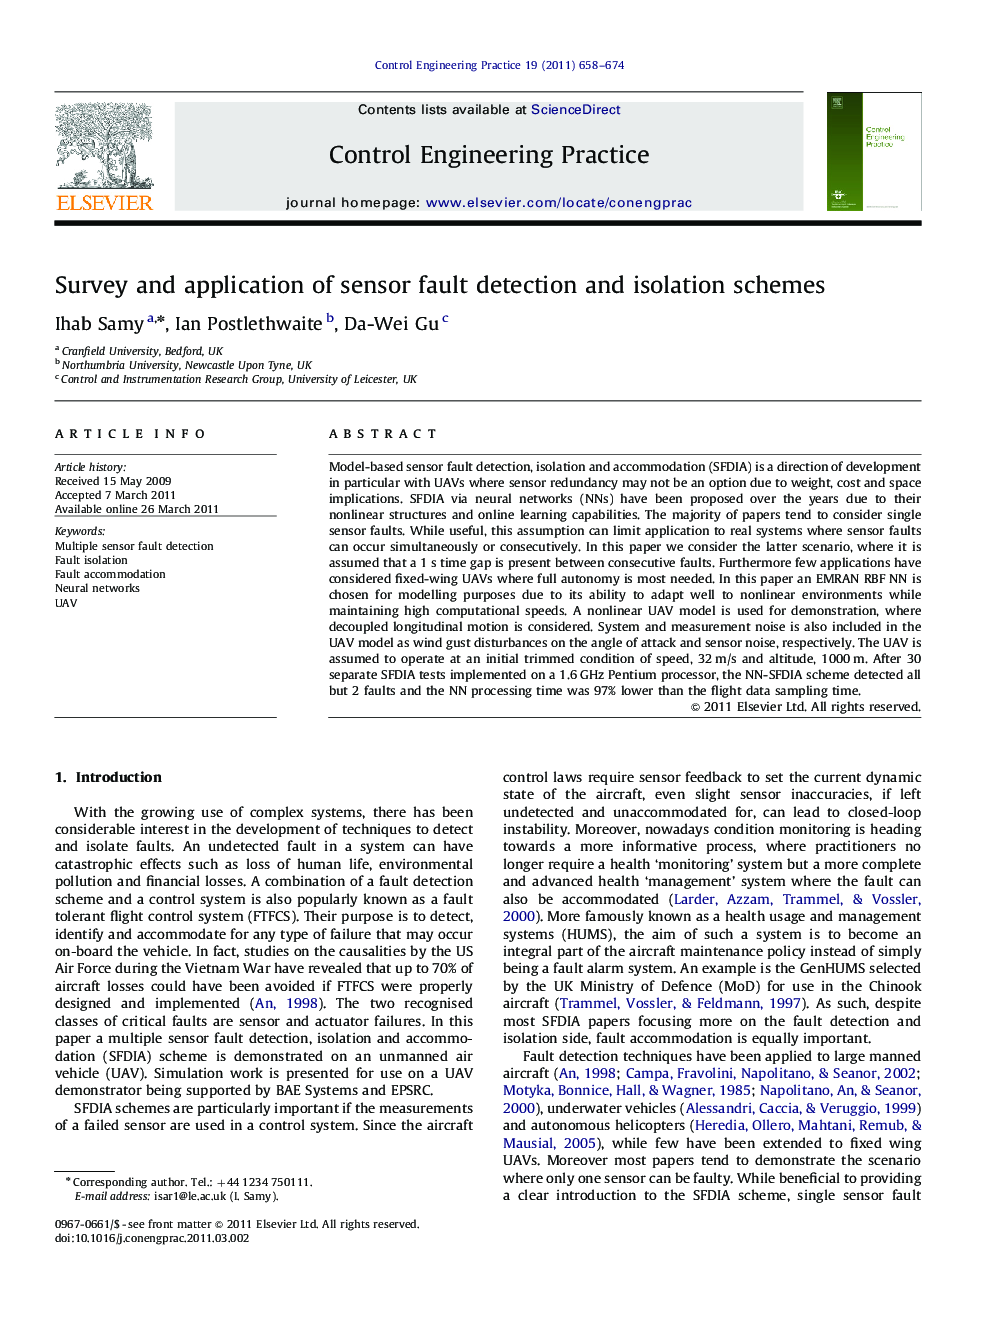 Survey and application of sensor fault detection and isolation schemes